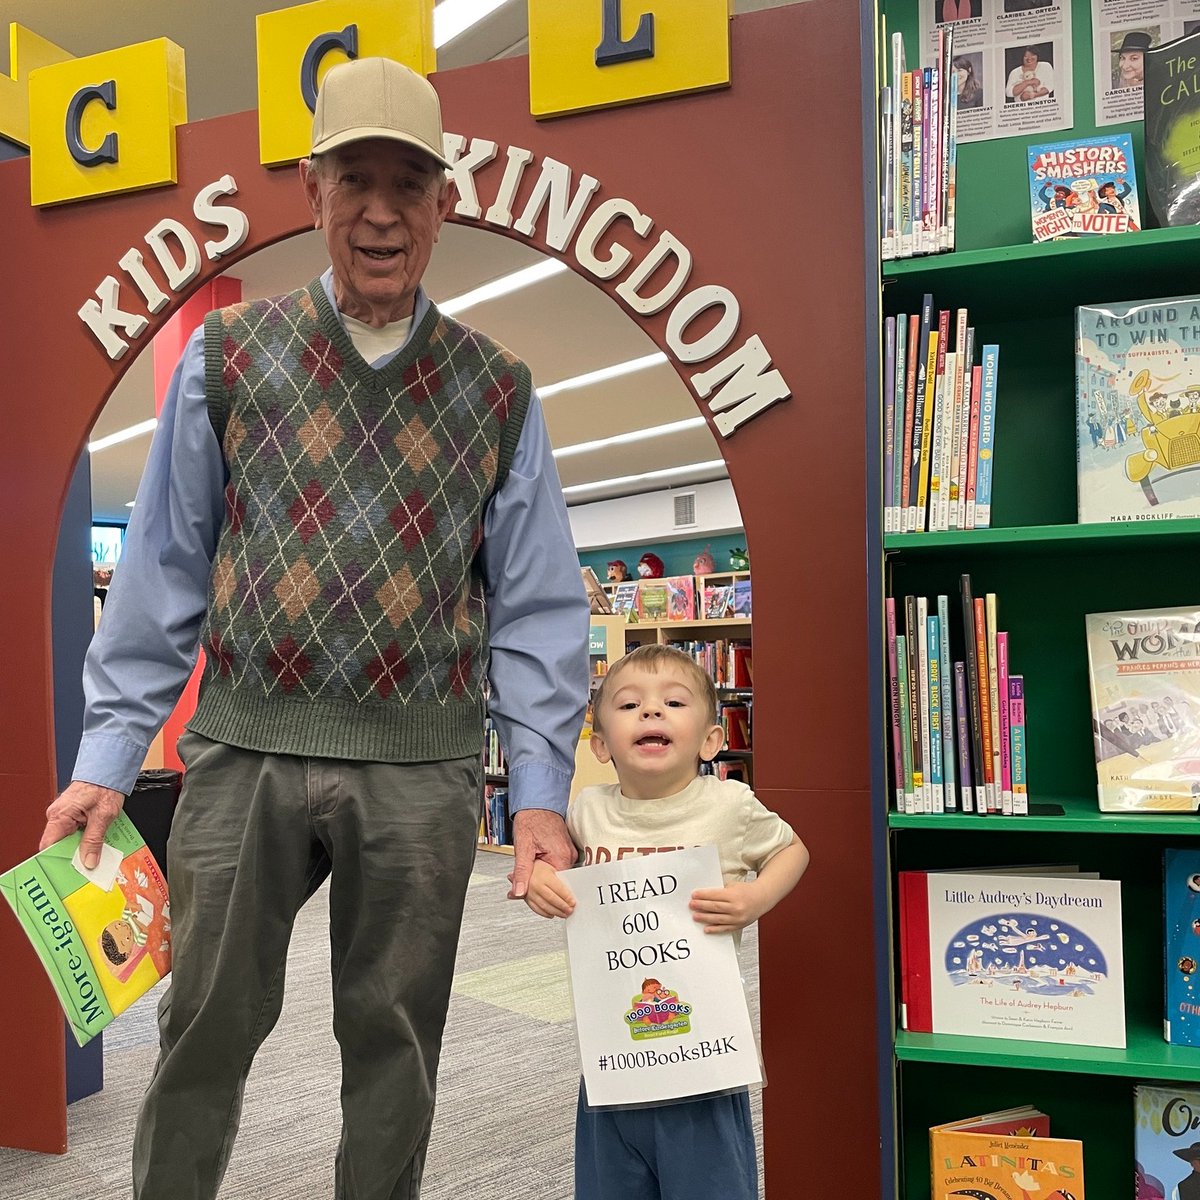 Congratulations to Henry on reading 600 books! He is well on his way to reaching the goal of 1000 Books Before Kindergarten! Way to go, Henry!

#1000booksbeforekindergarten #1000bksb4k #cclnj